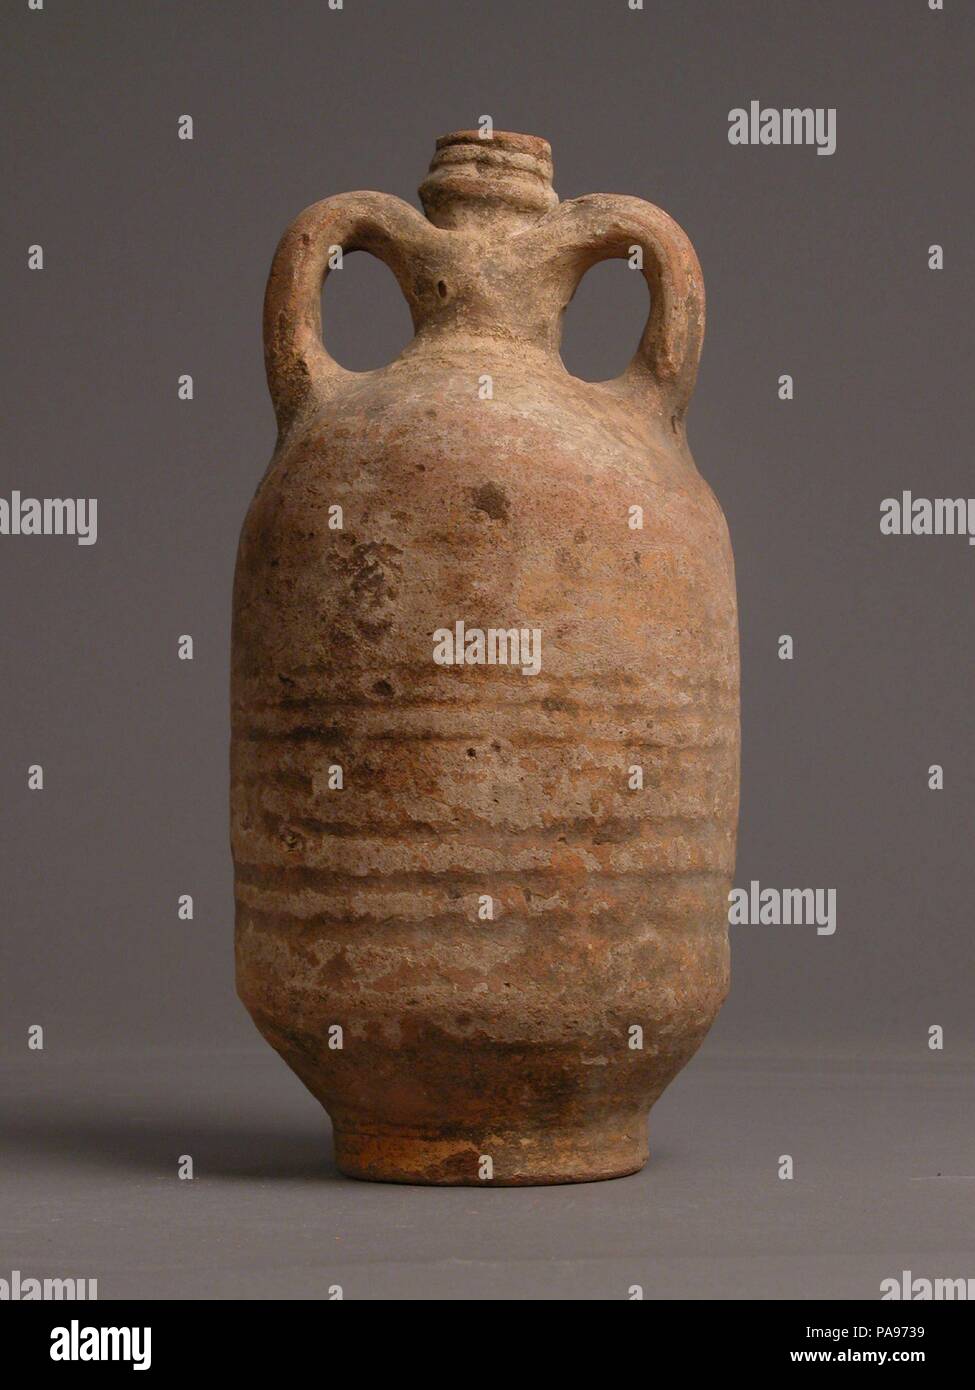 Jug. Culture: Coptic. Dimensions: Overall: 9 7/16 x 4 5/8 in. (23.9 x 11.7 cm). Date: 4th-7th century. Museum: Metropolitan Museum of Art, New York, USA. Stock Photo